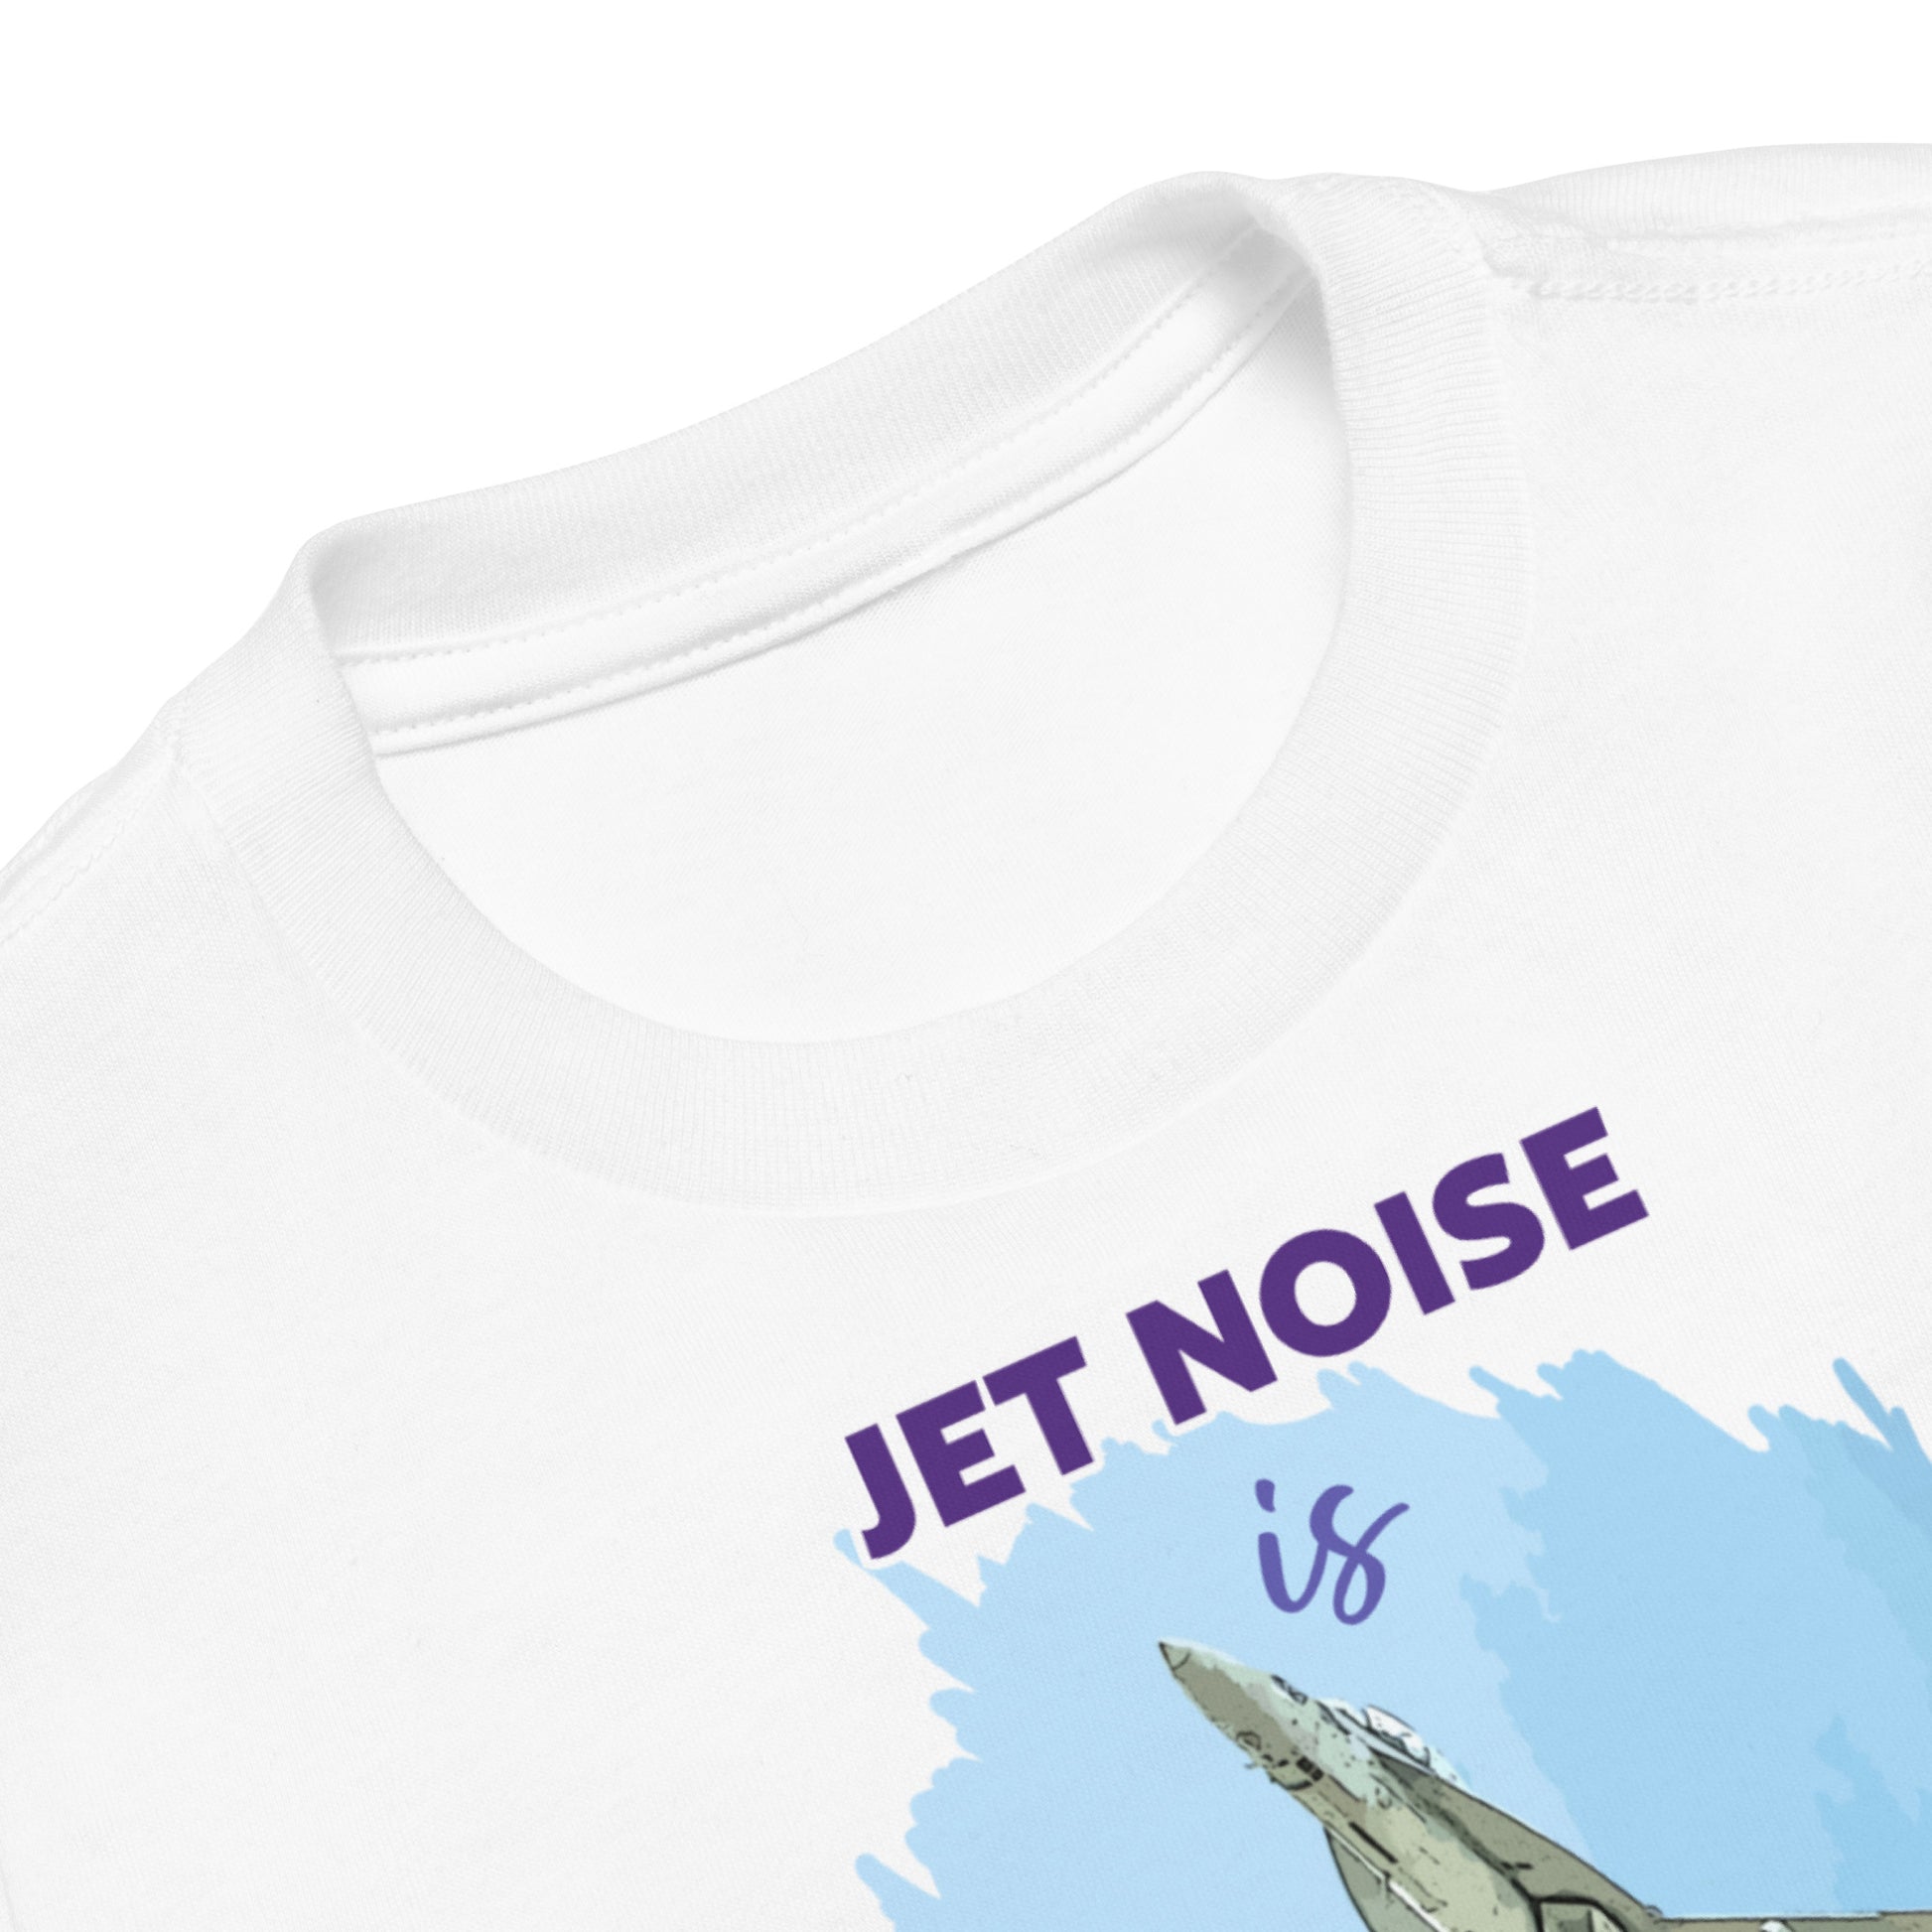 closeup of t-shirt showing Jet Noise is. Also showing the nose of the jet fighter